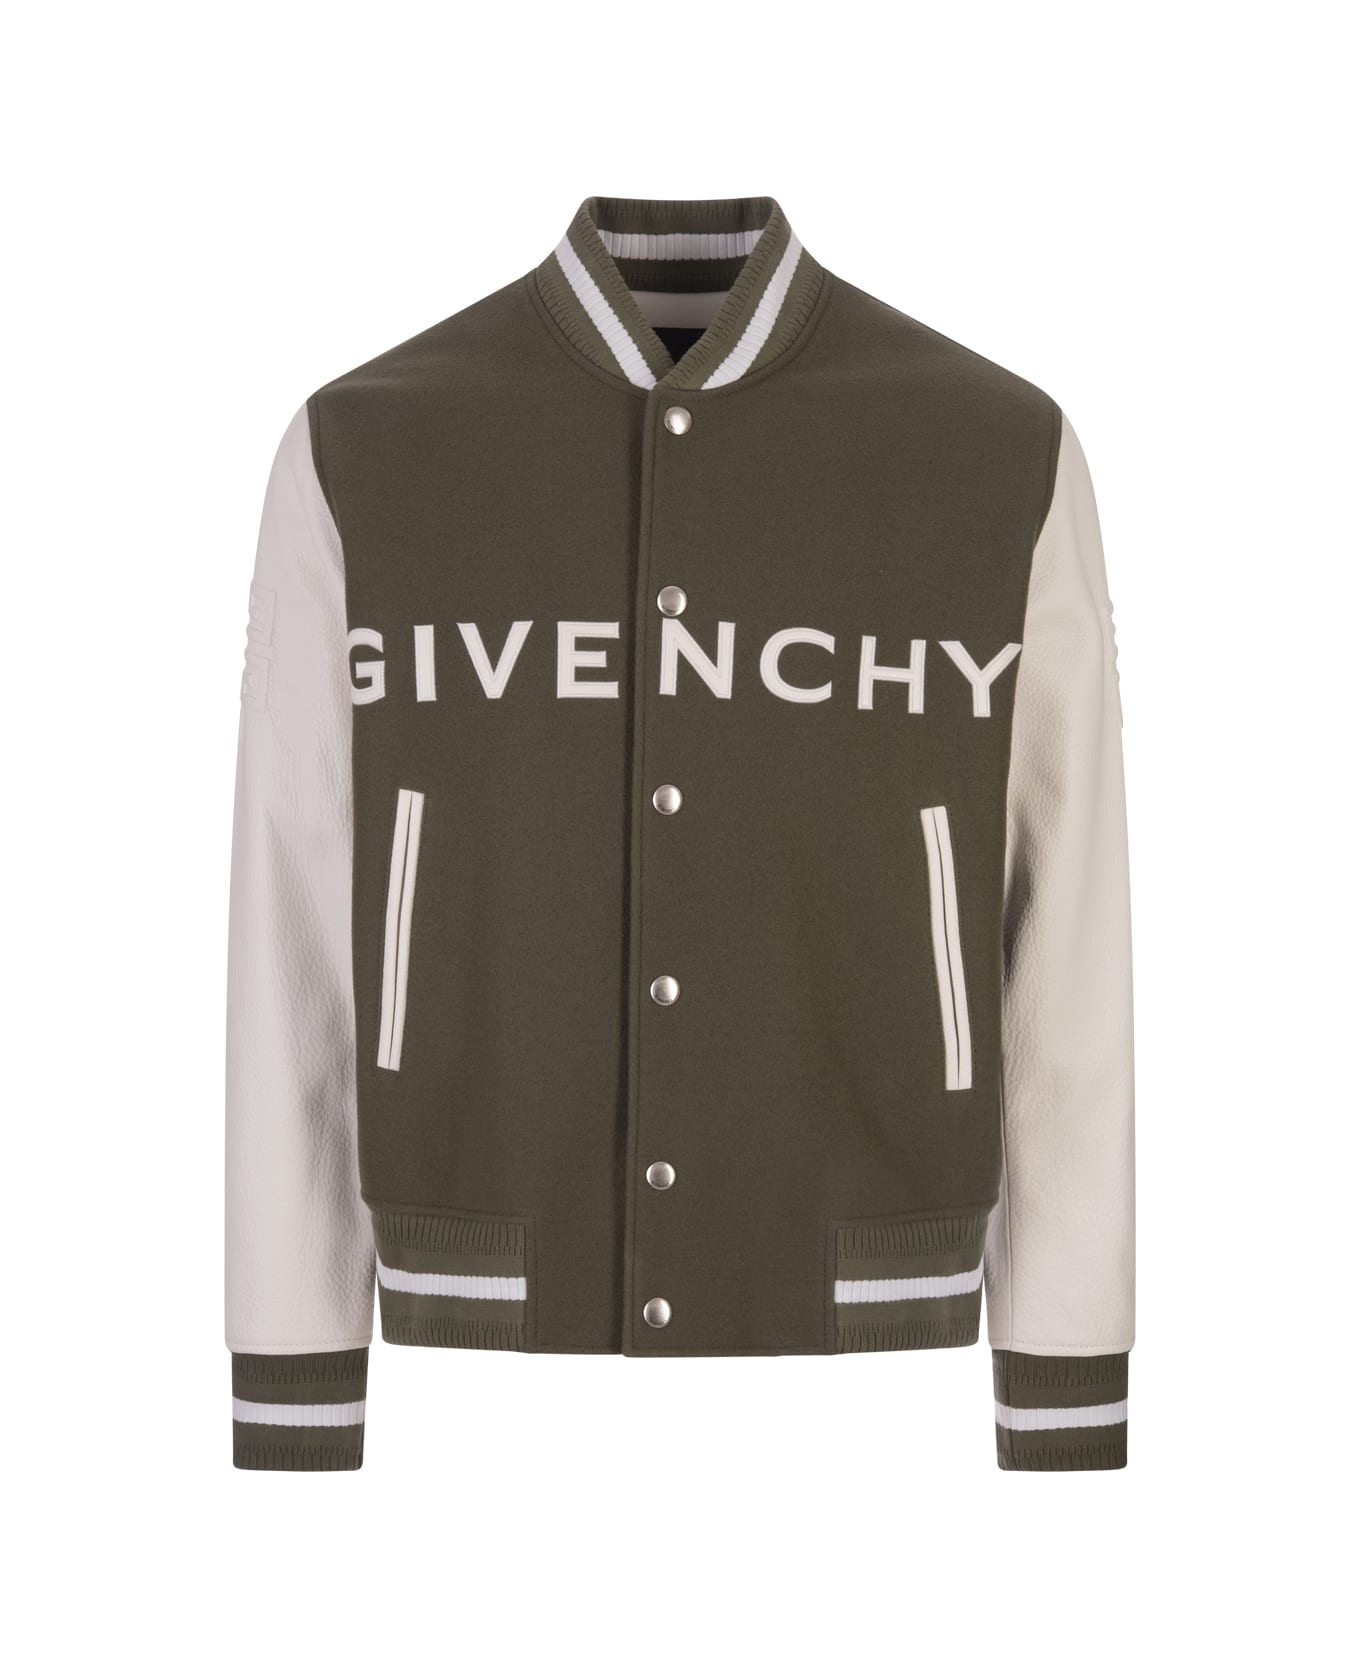 Givenchy Khaki And White Givenchy Bomber Jacket In Wool And Leather - Green コート＆ジャケット